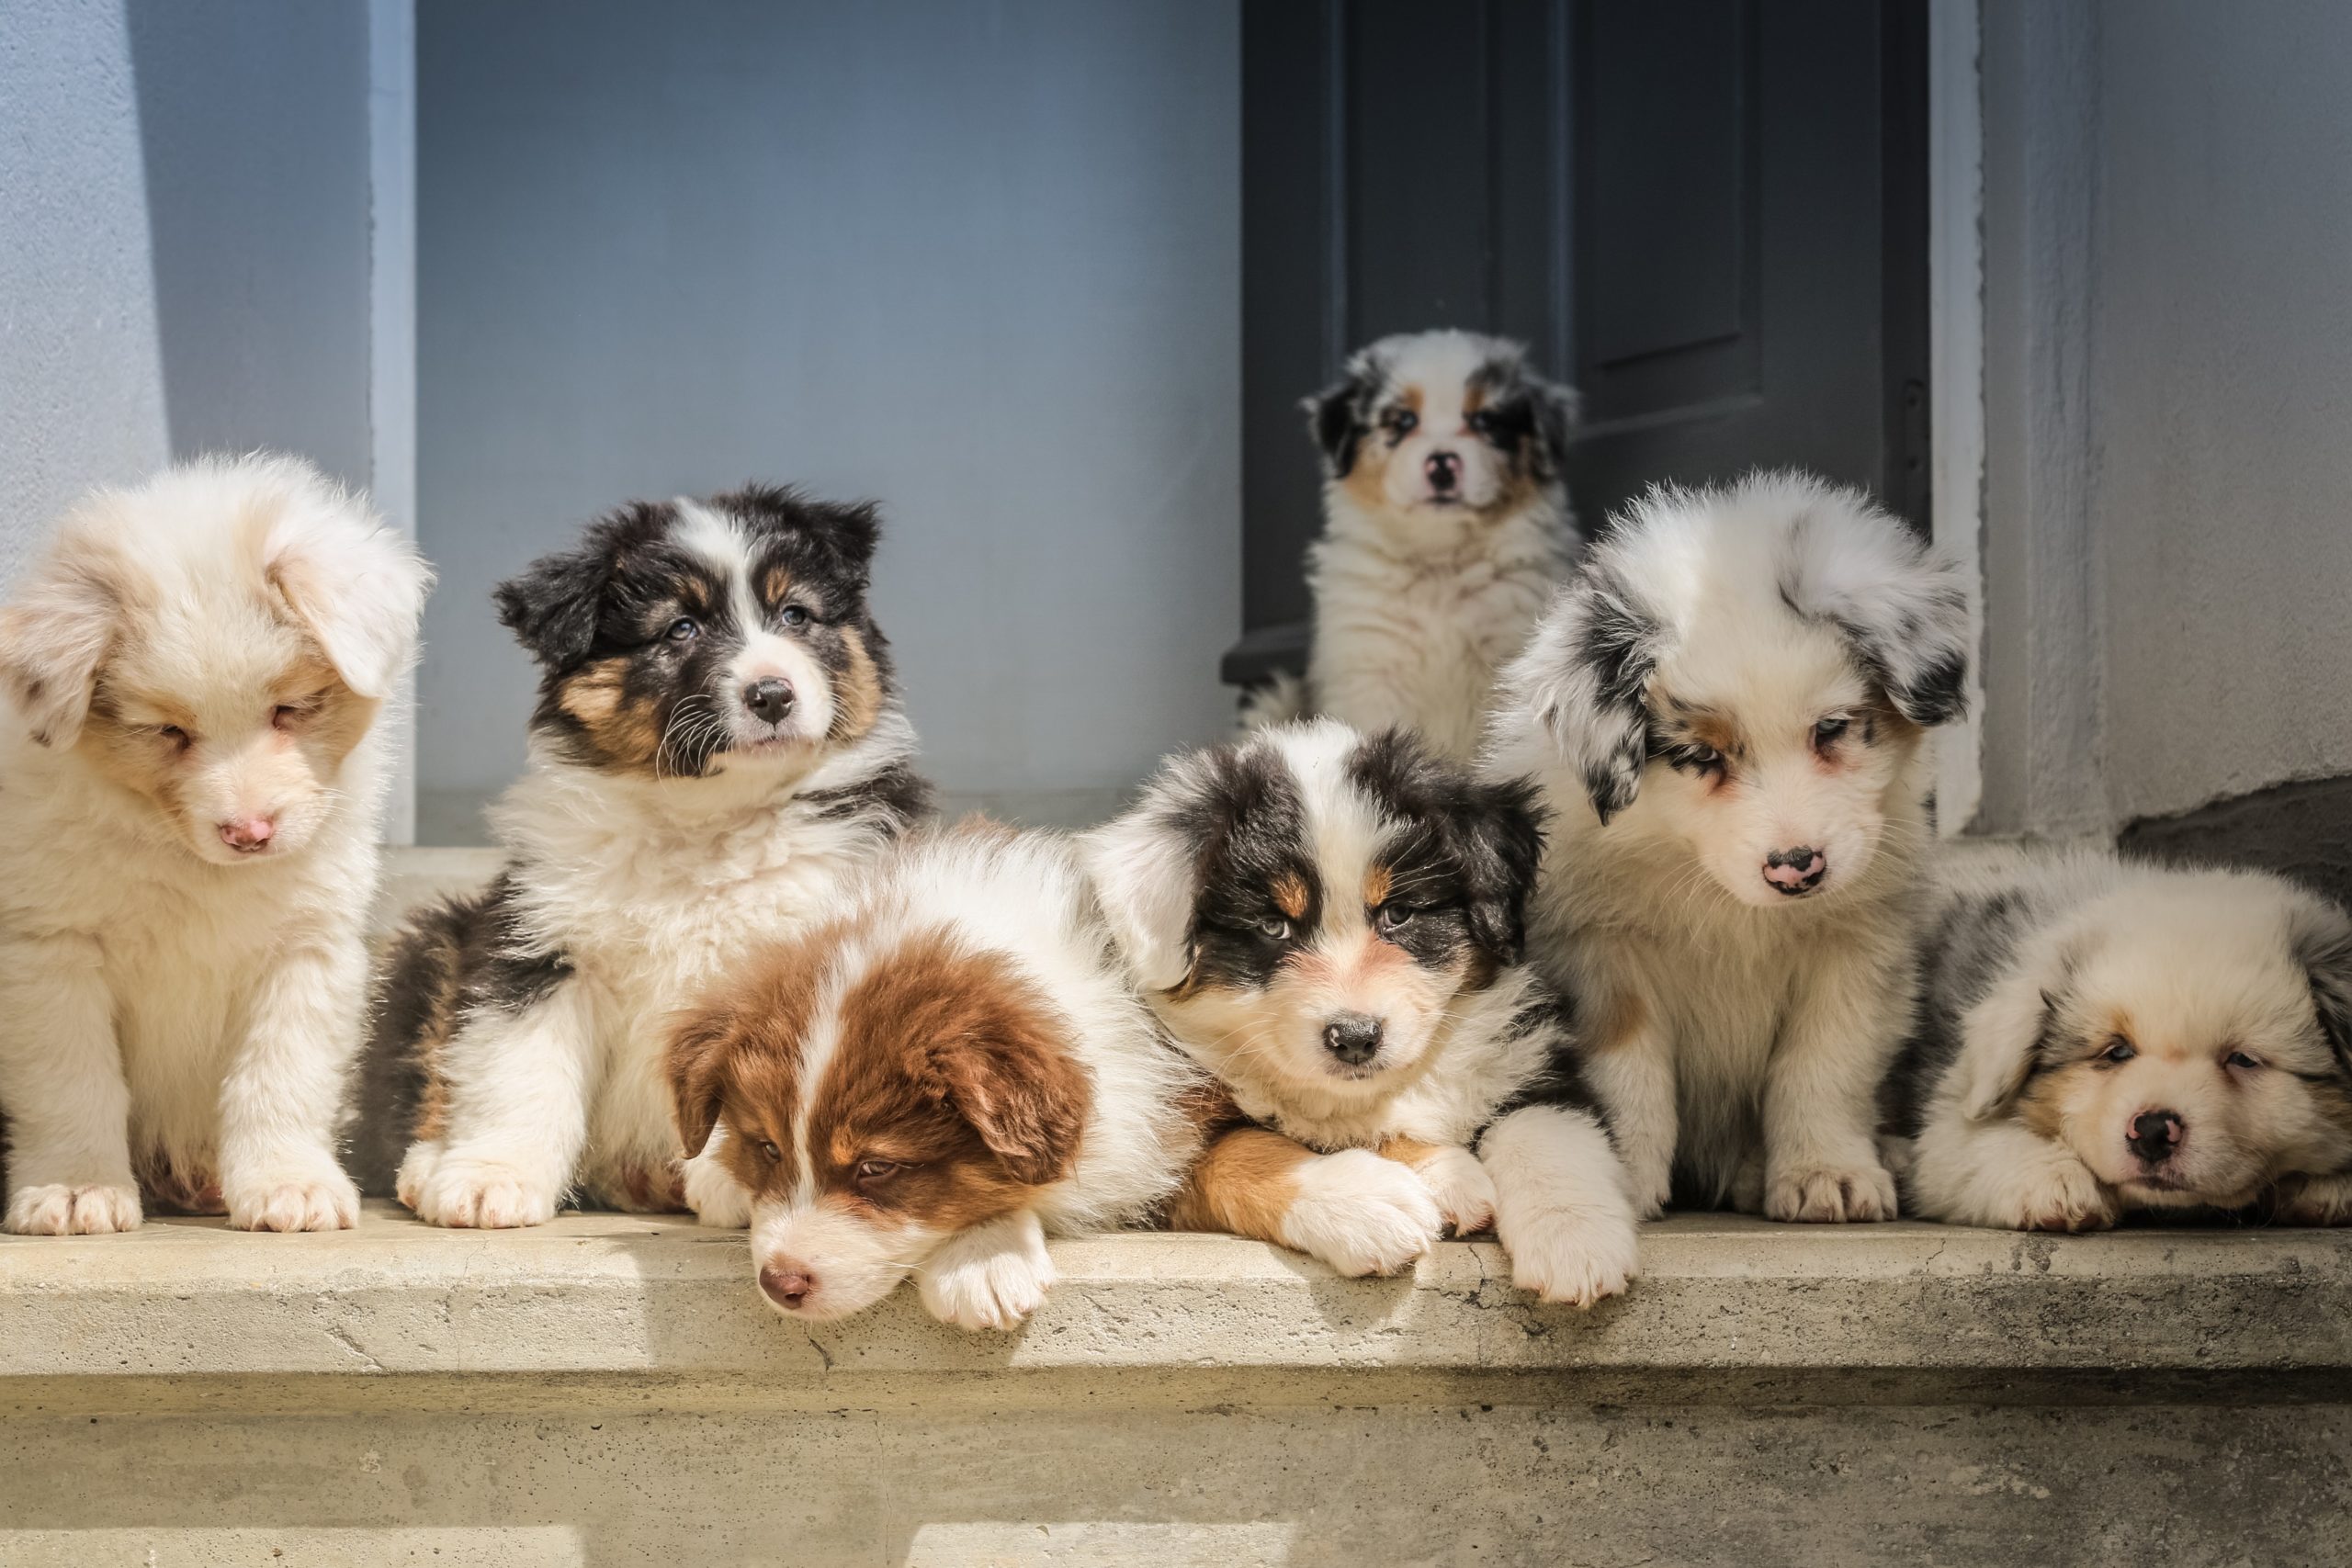 How to pick a puppy from a litter: Our advice